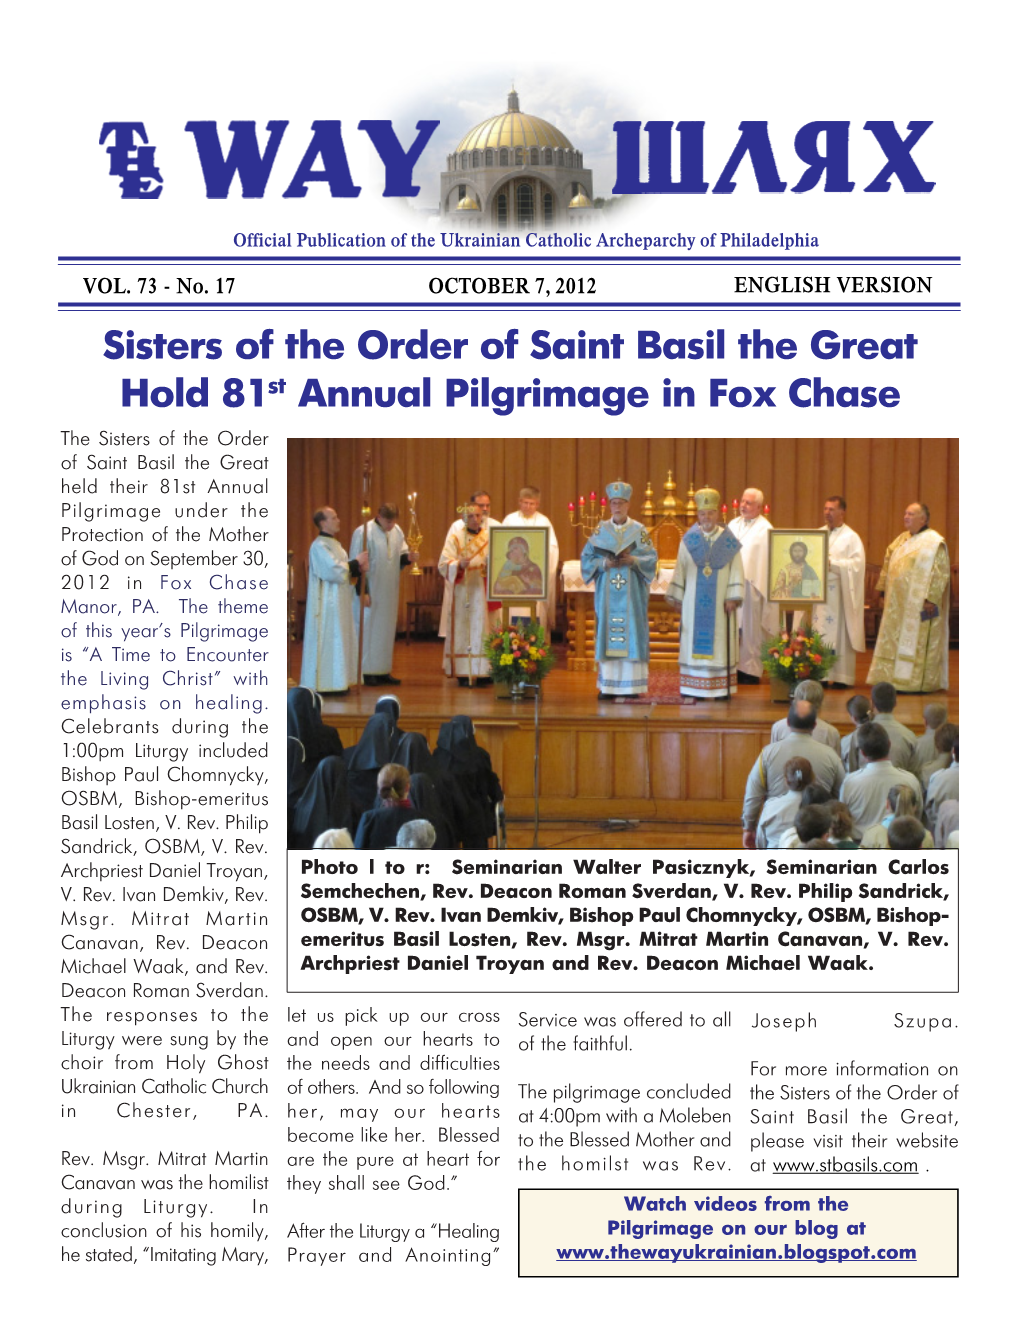 Sisters of the Order of Saint Basil the Great Hold 81St Annual Pilgrimage in Fox Chase